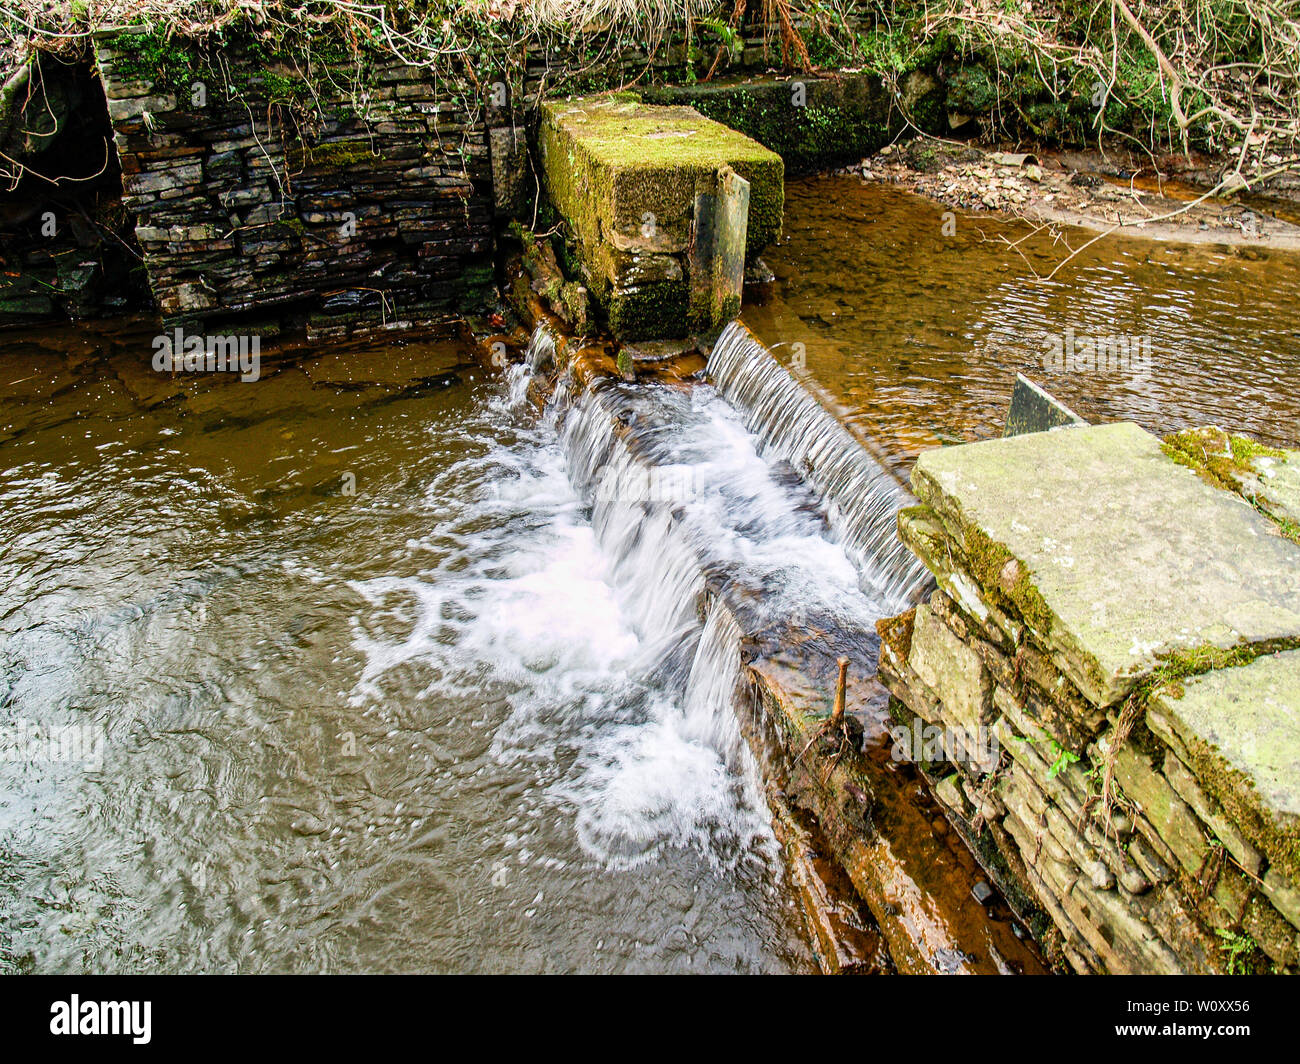 Water falling over a weir on the river lliw in Wales. Between the upper and lower lliw reservoir. Afon Lliw, near Felindre, Swansea, Wales, UK. Stock Photo